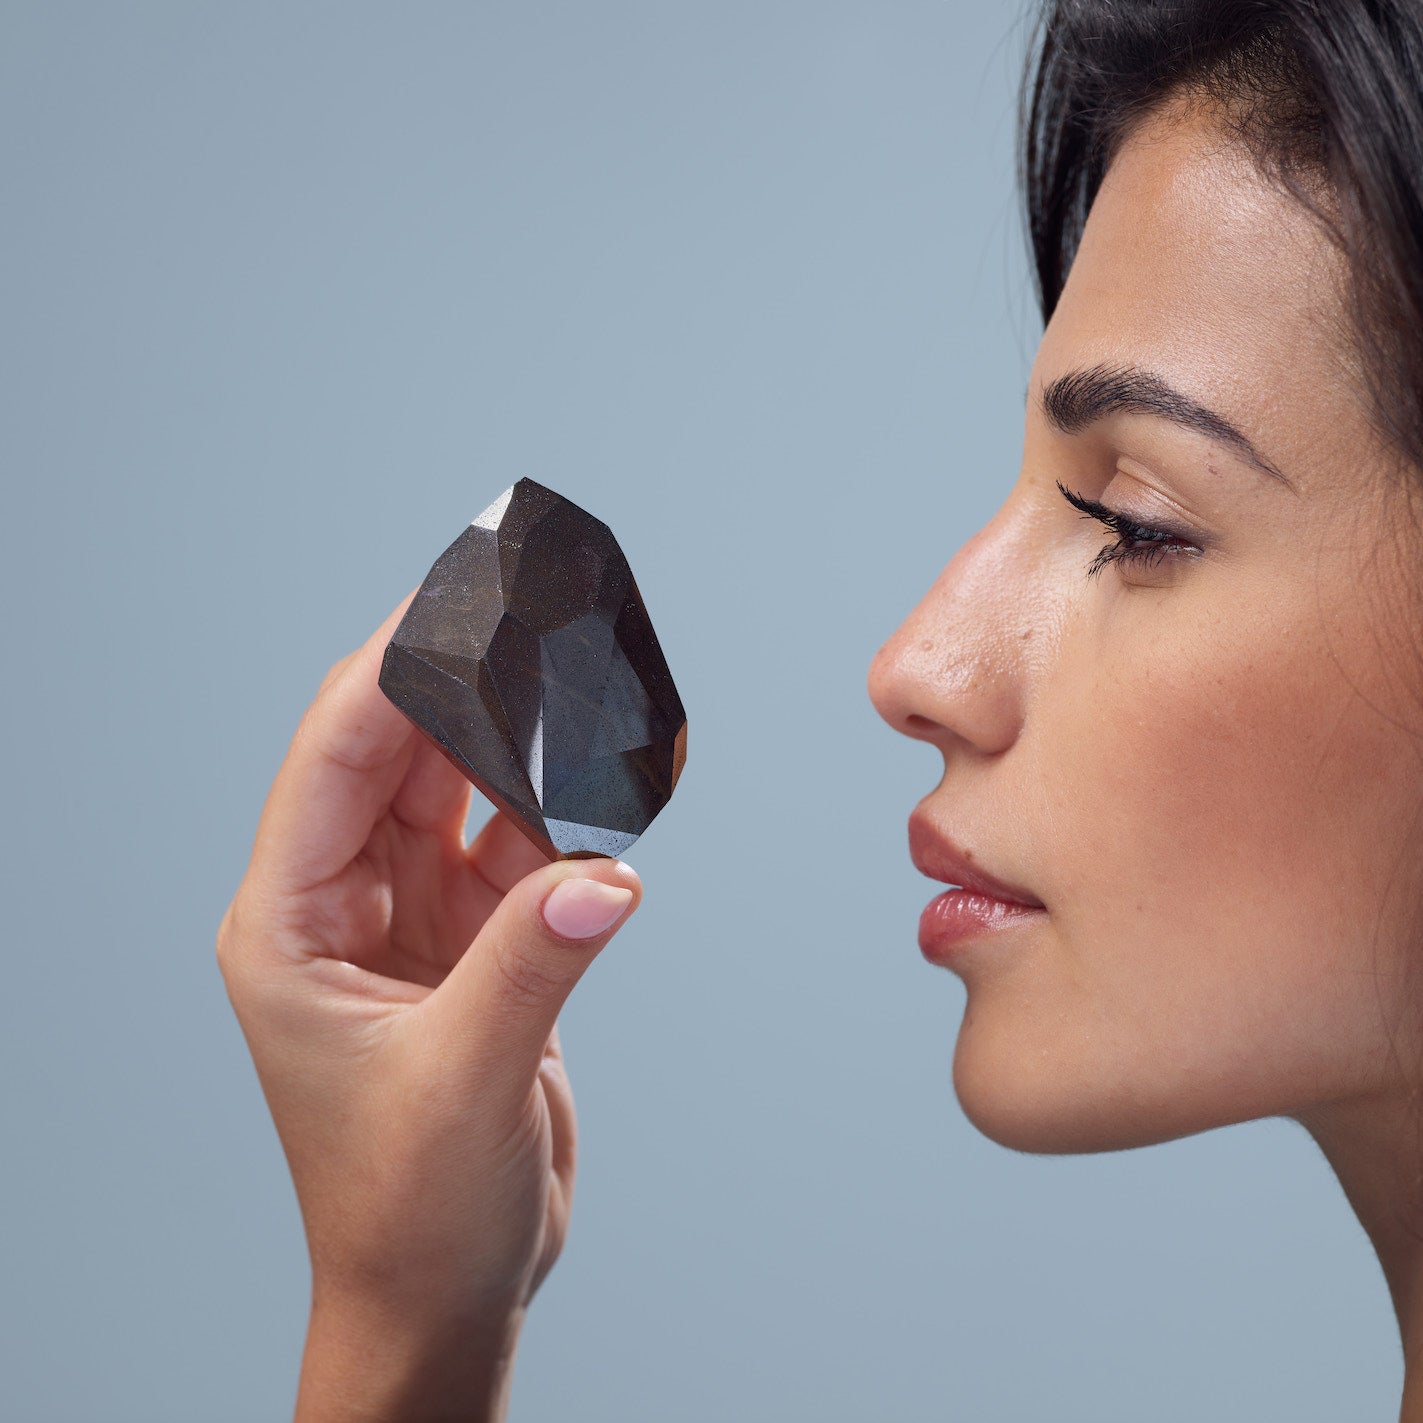 555.55-carat Black Diamond to be Auctioned in February